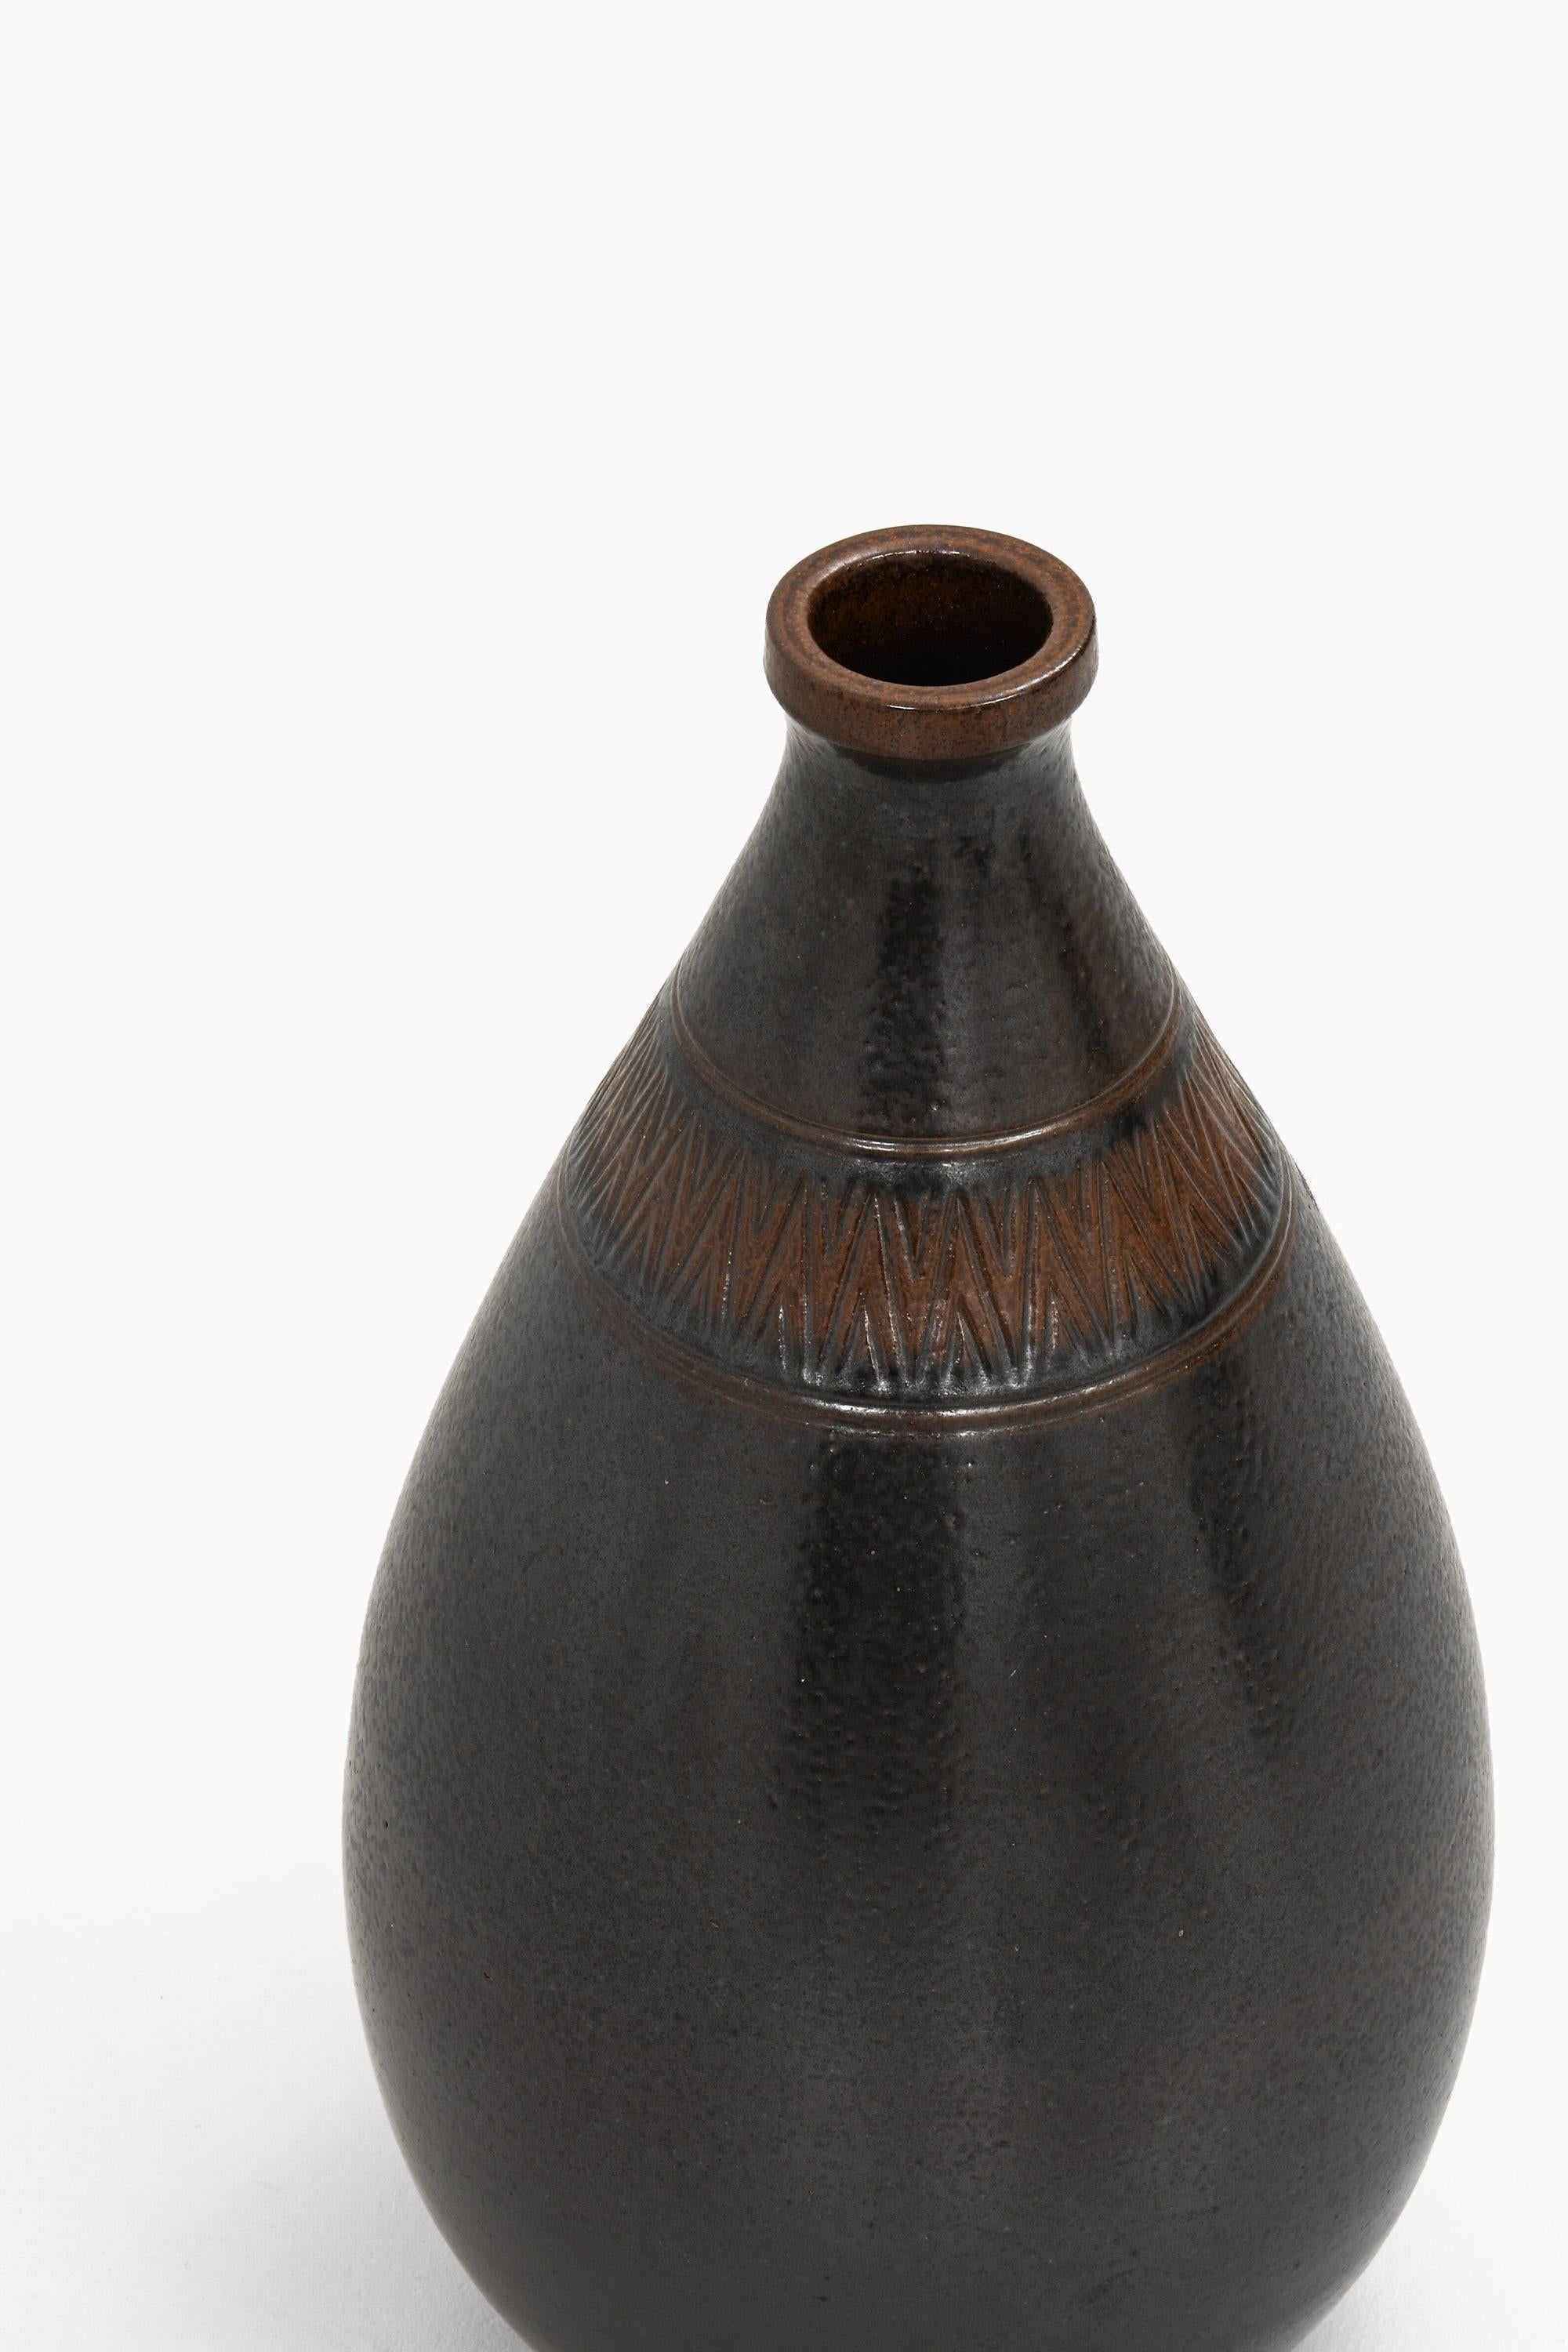 Swedish Floor Vase in Ceramic by Arthur Andersson, 1950's For Sale